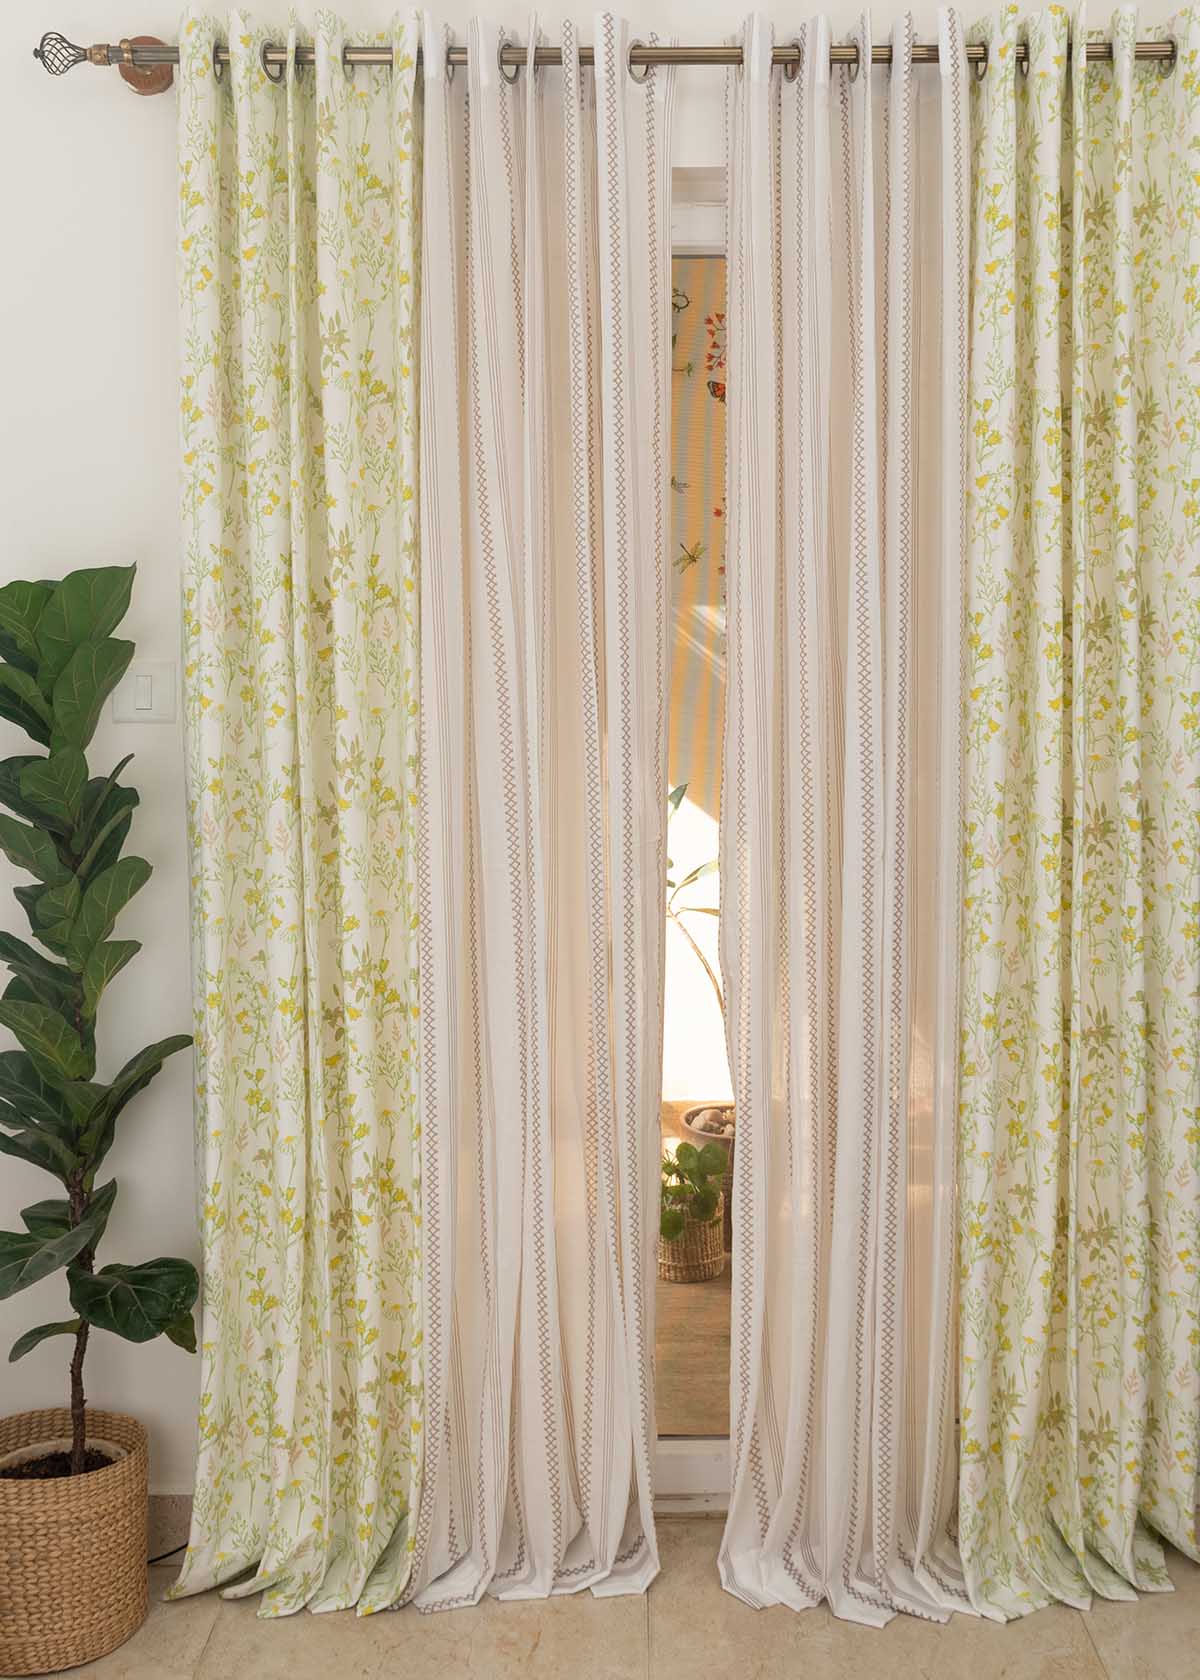 Tulip Garden, Picket Fence Sheer Set Of 4 Combo Cotton Curtain - Yellow And Walnut Gray